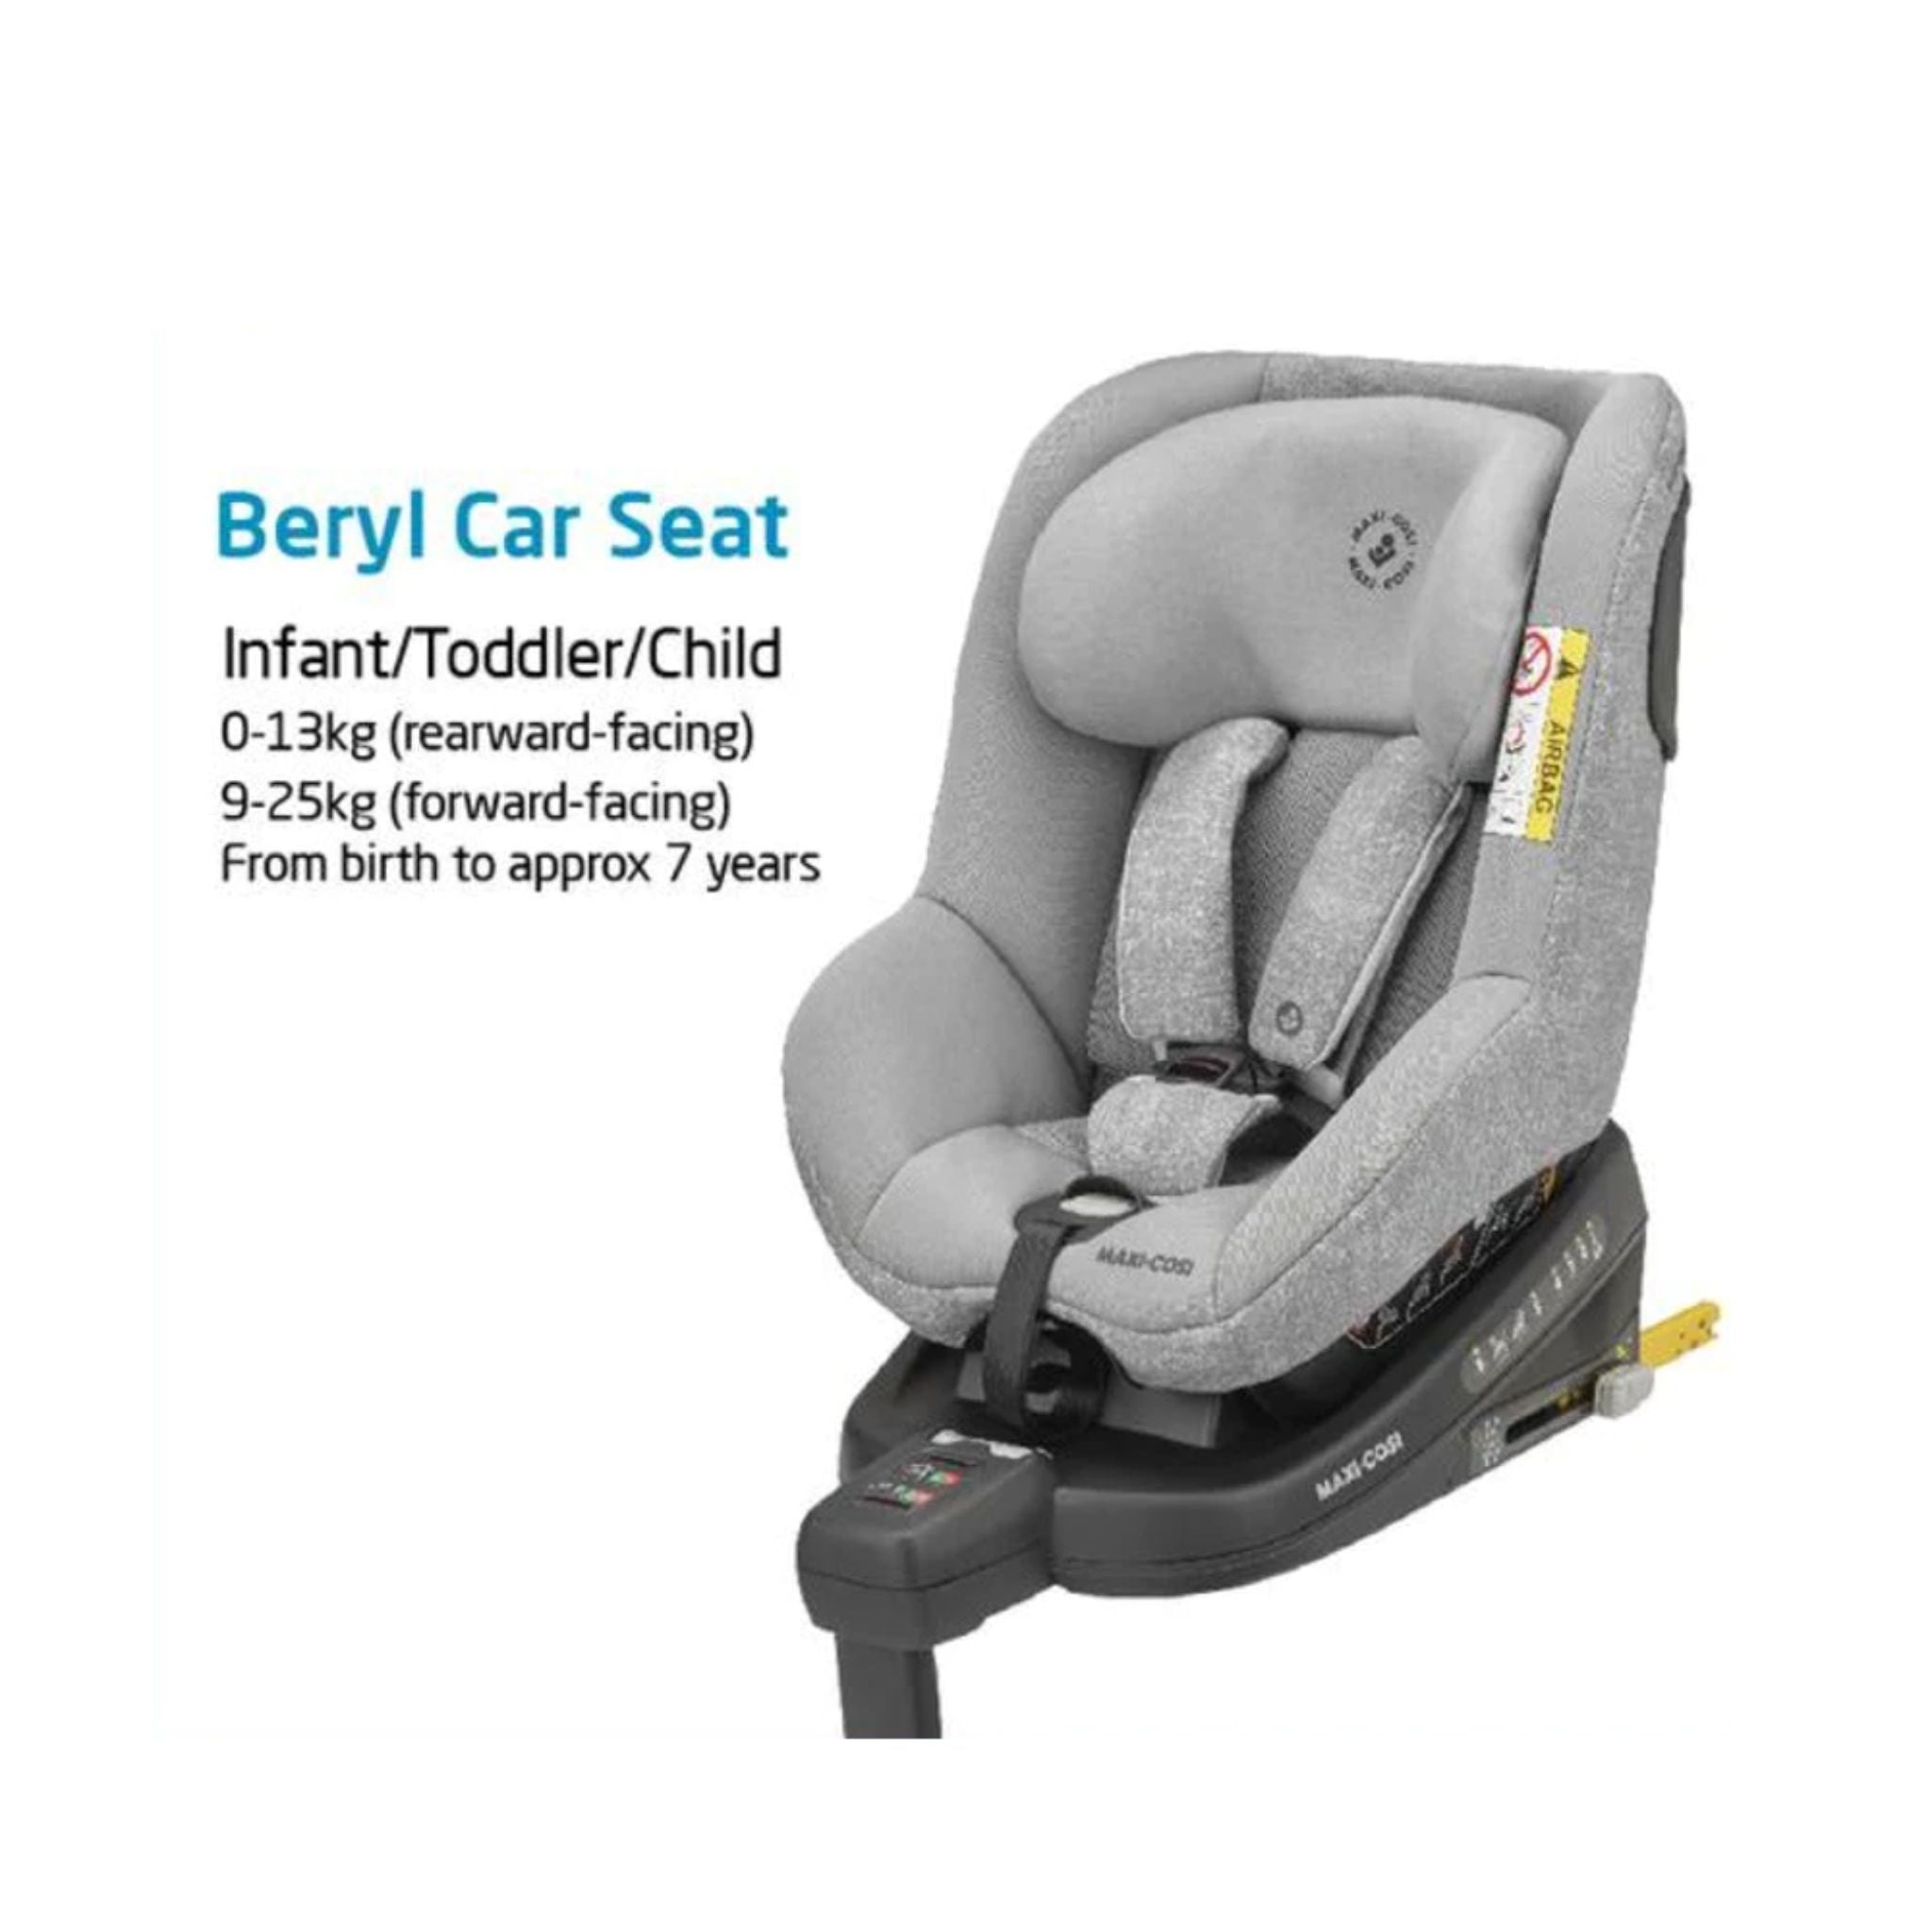 Maxi Cosi Beryl Isofix Baby Car Seat (0 months - 7 years) - Authentic Black